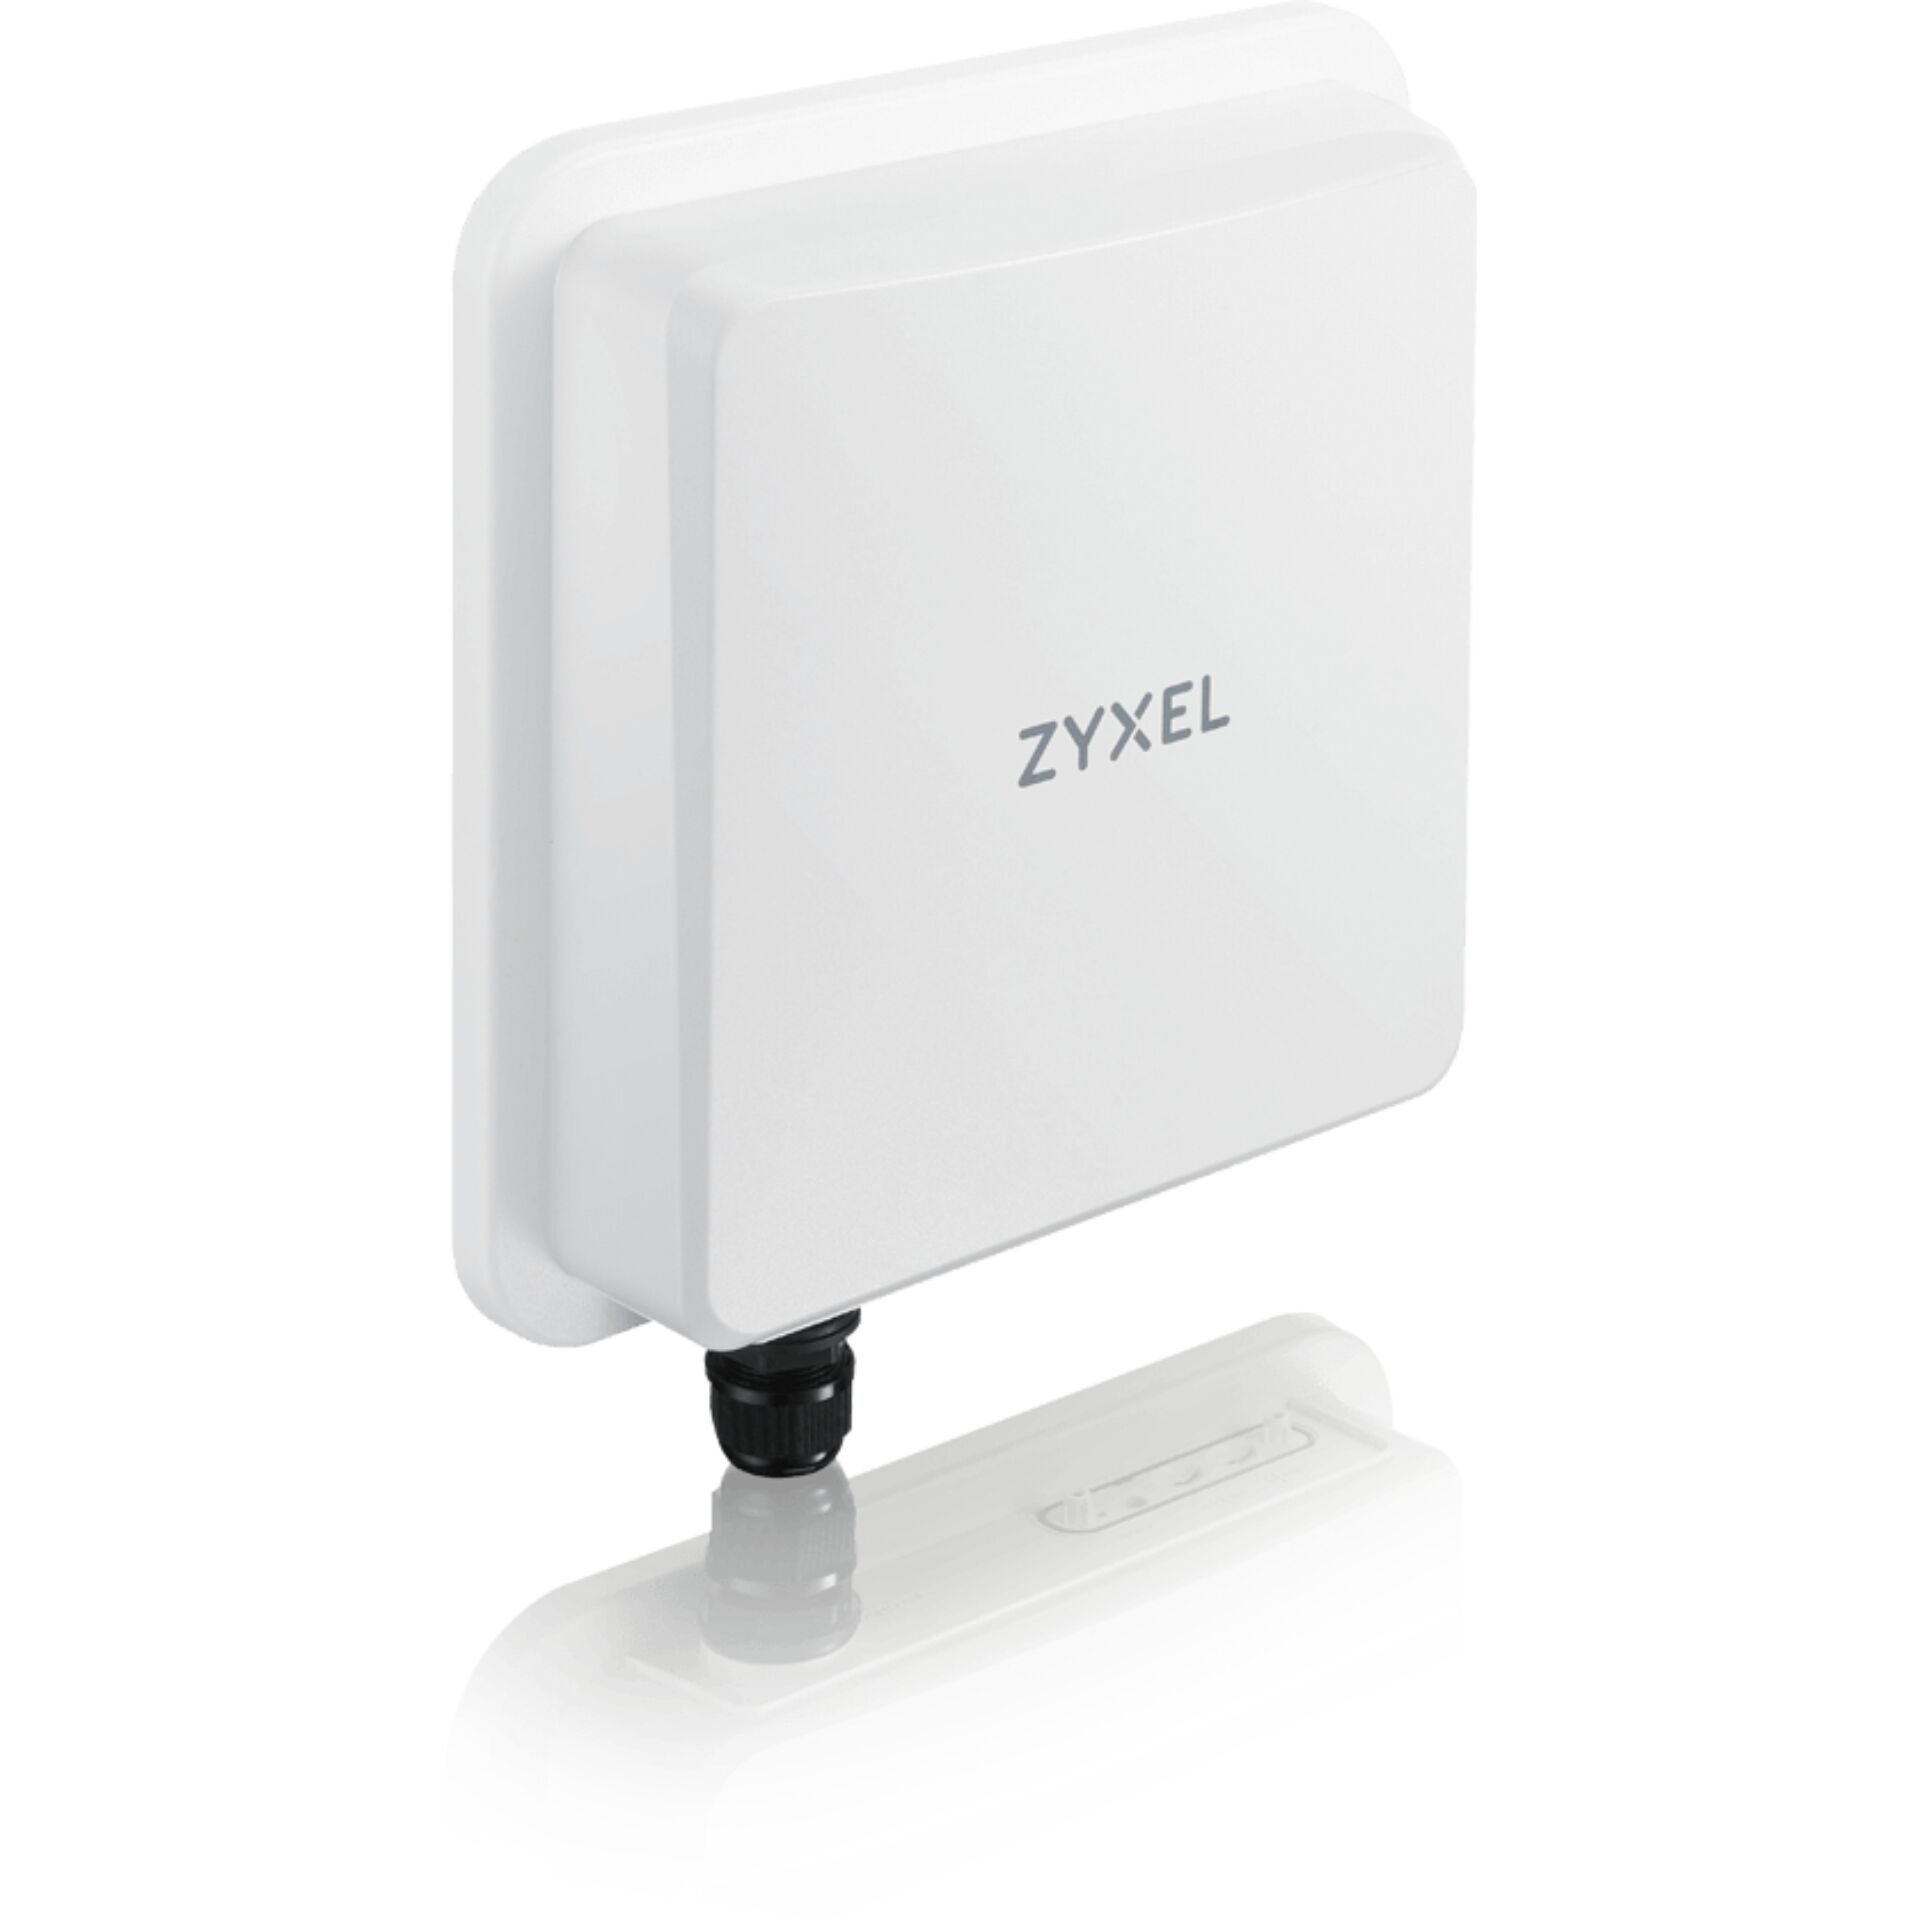 Zyxel NR7101-GB01V1F Outdoor Router